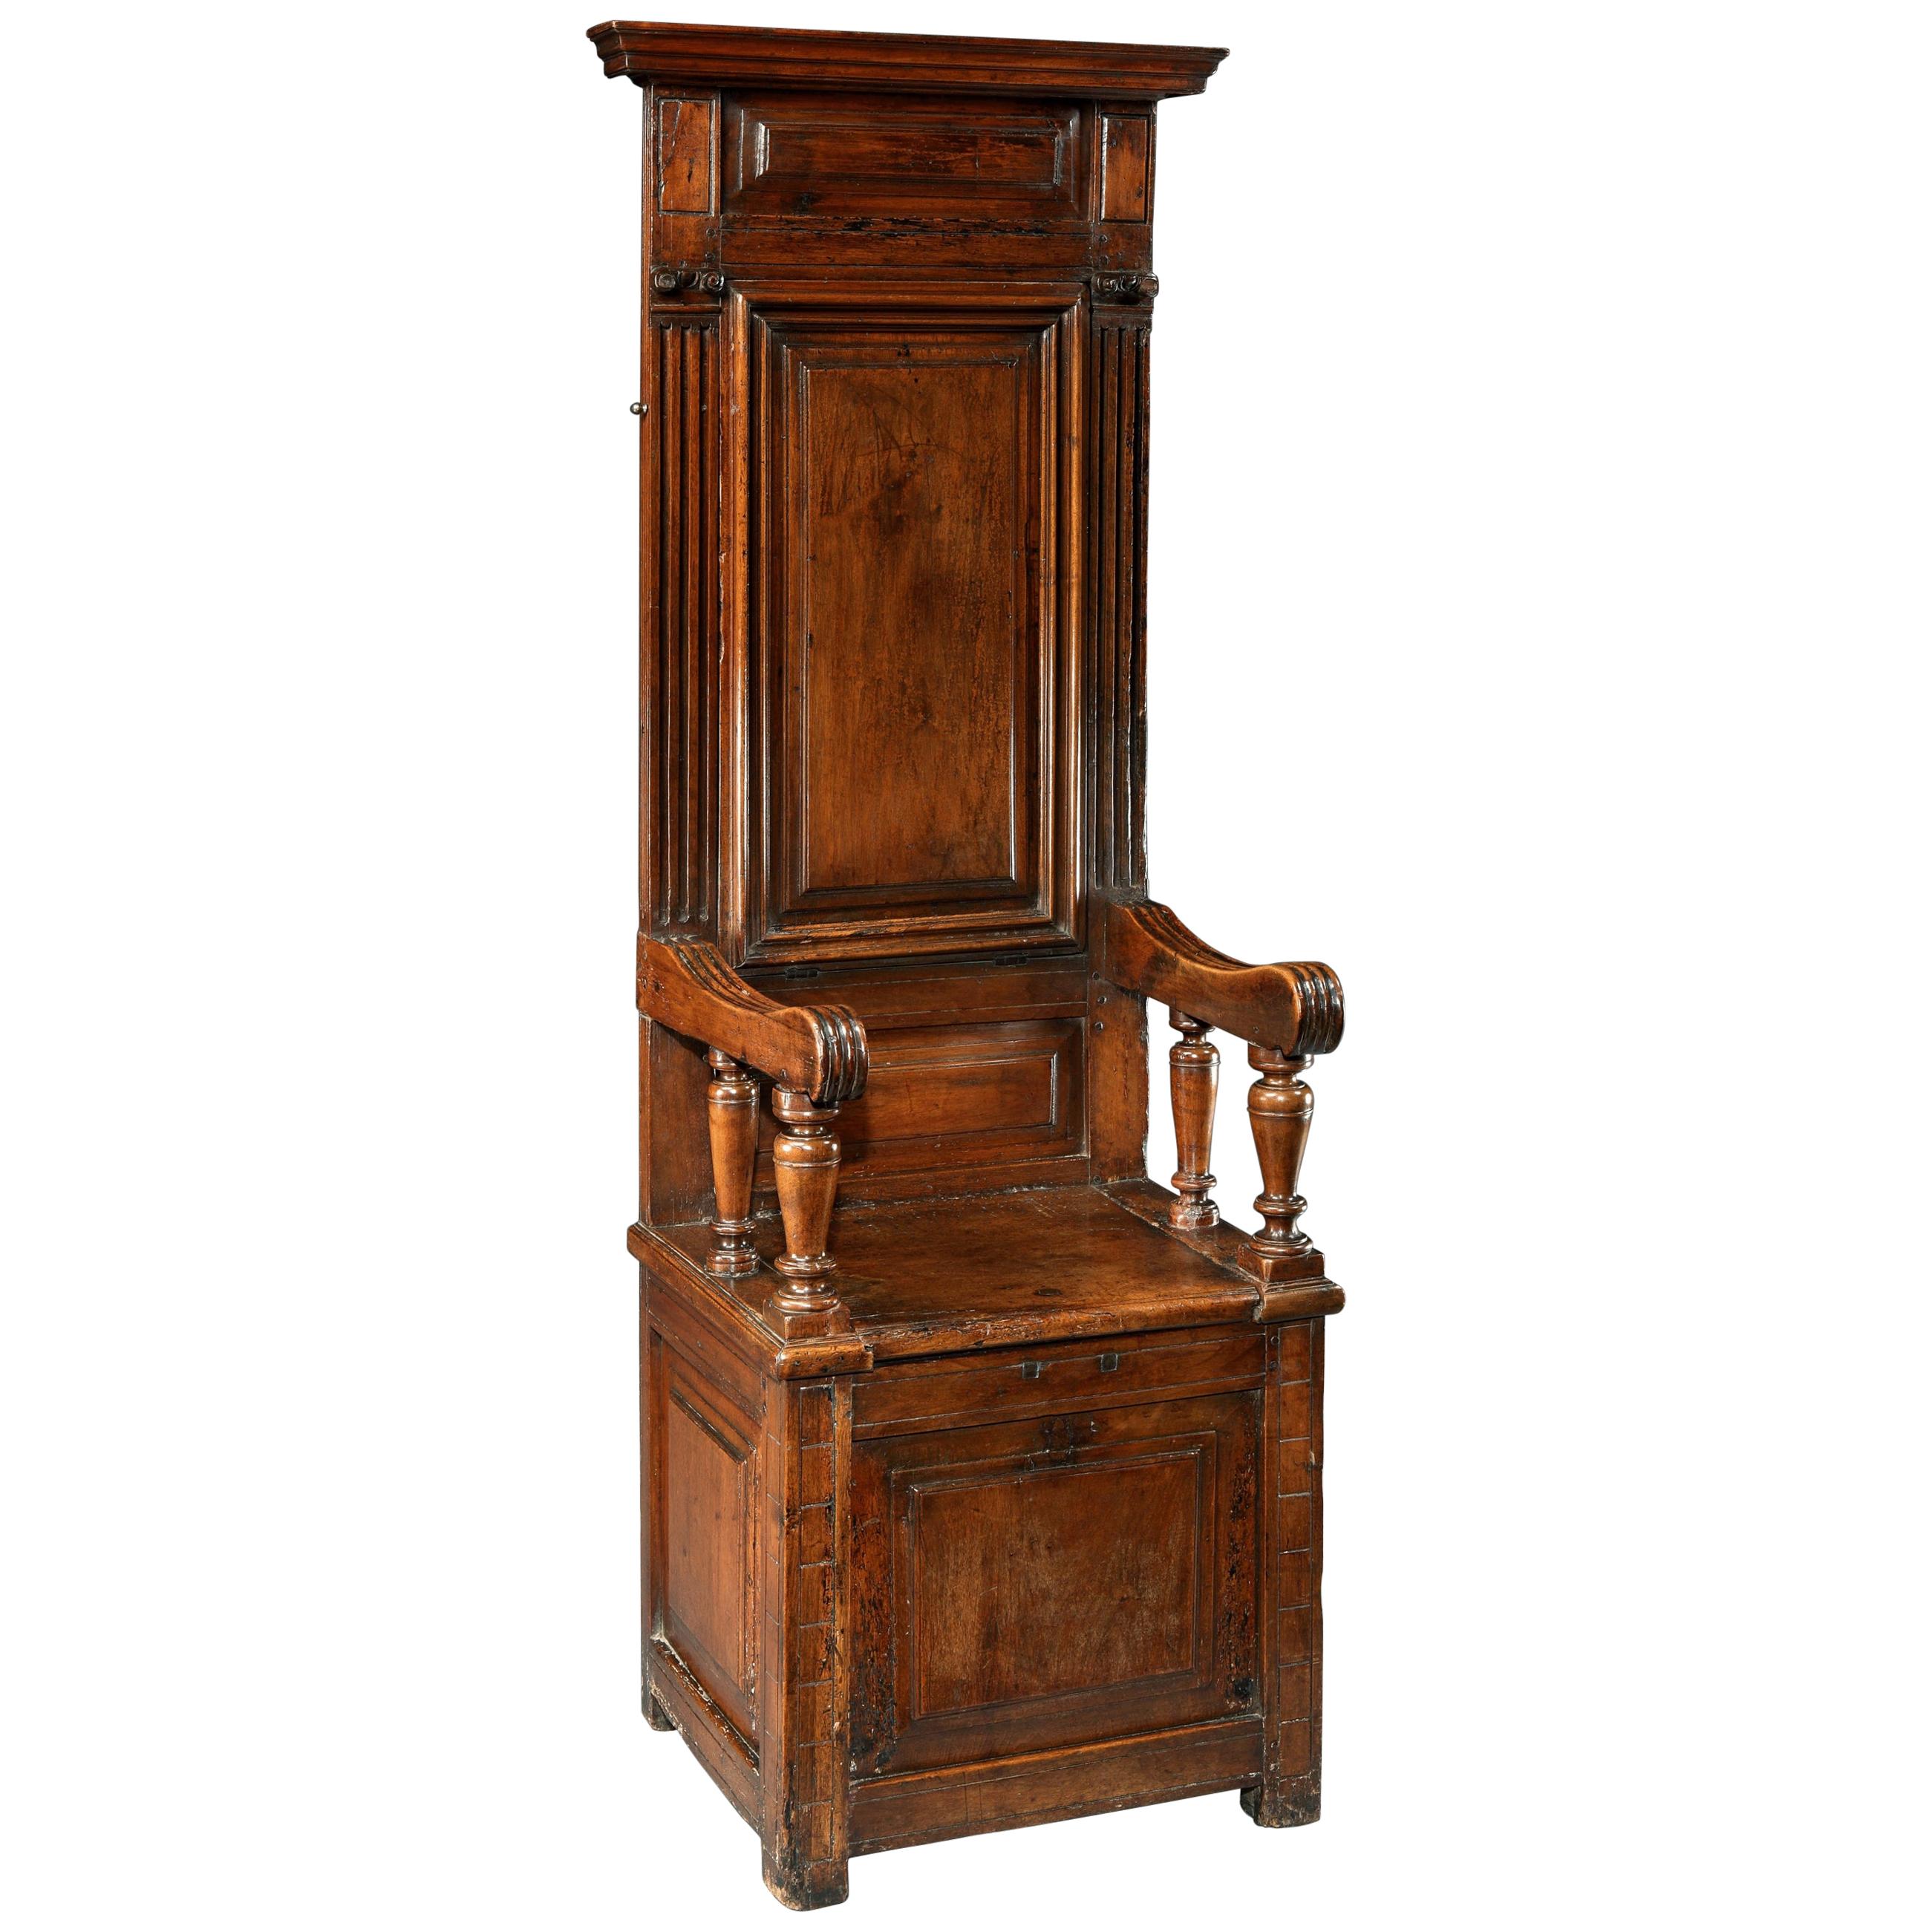 Cathedra or Throne Chair, Late 16th Century, French Second Renaissance, Walnut